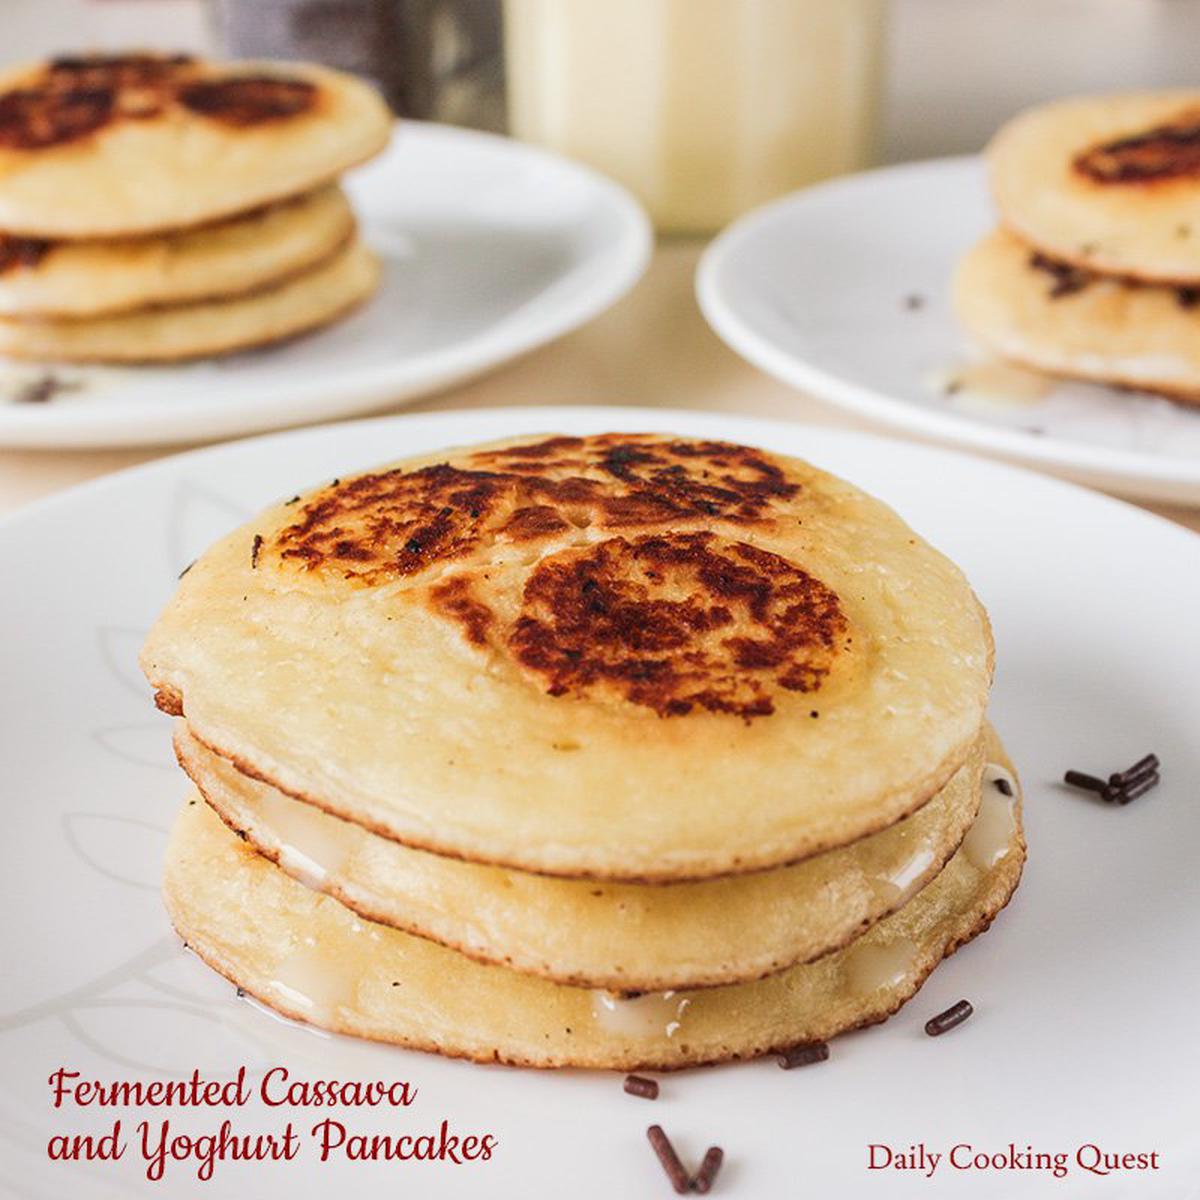 Stacks of yoghurt pancakes with fermented cassava slices